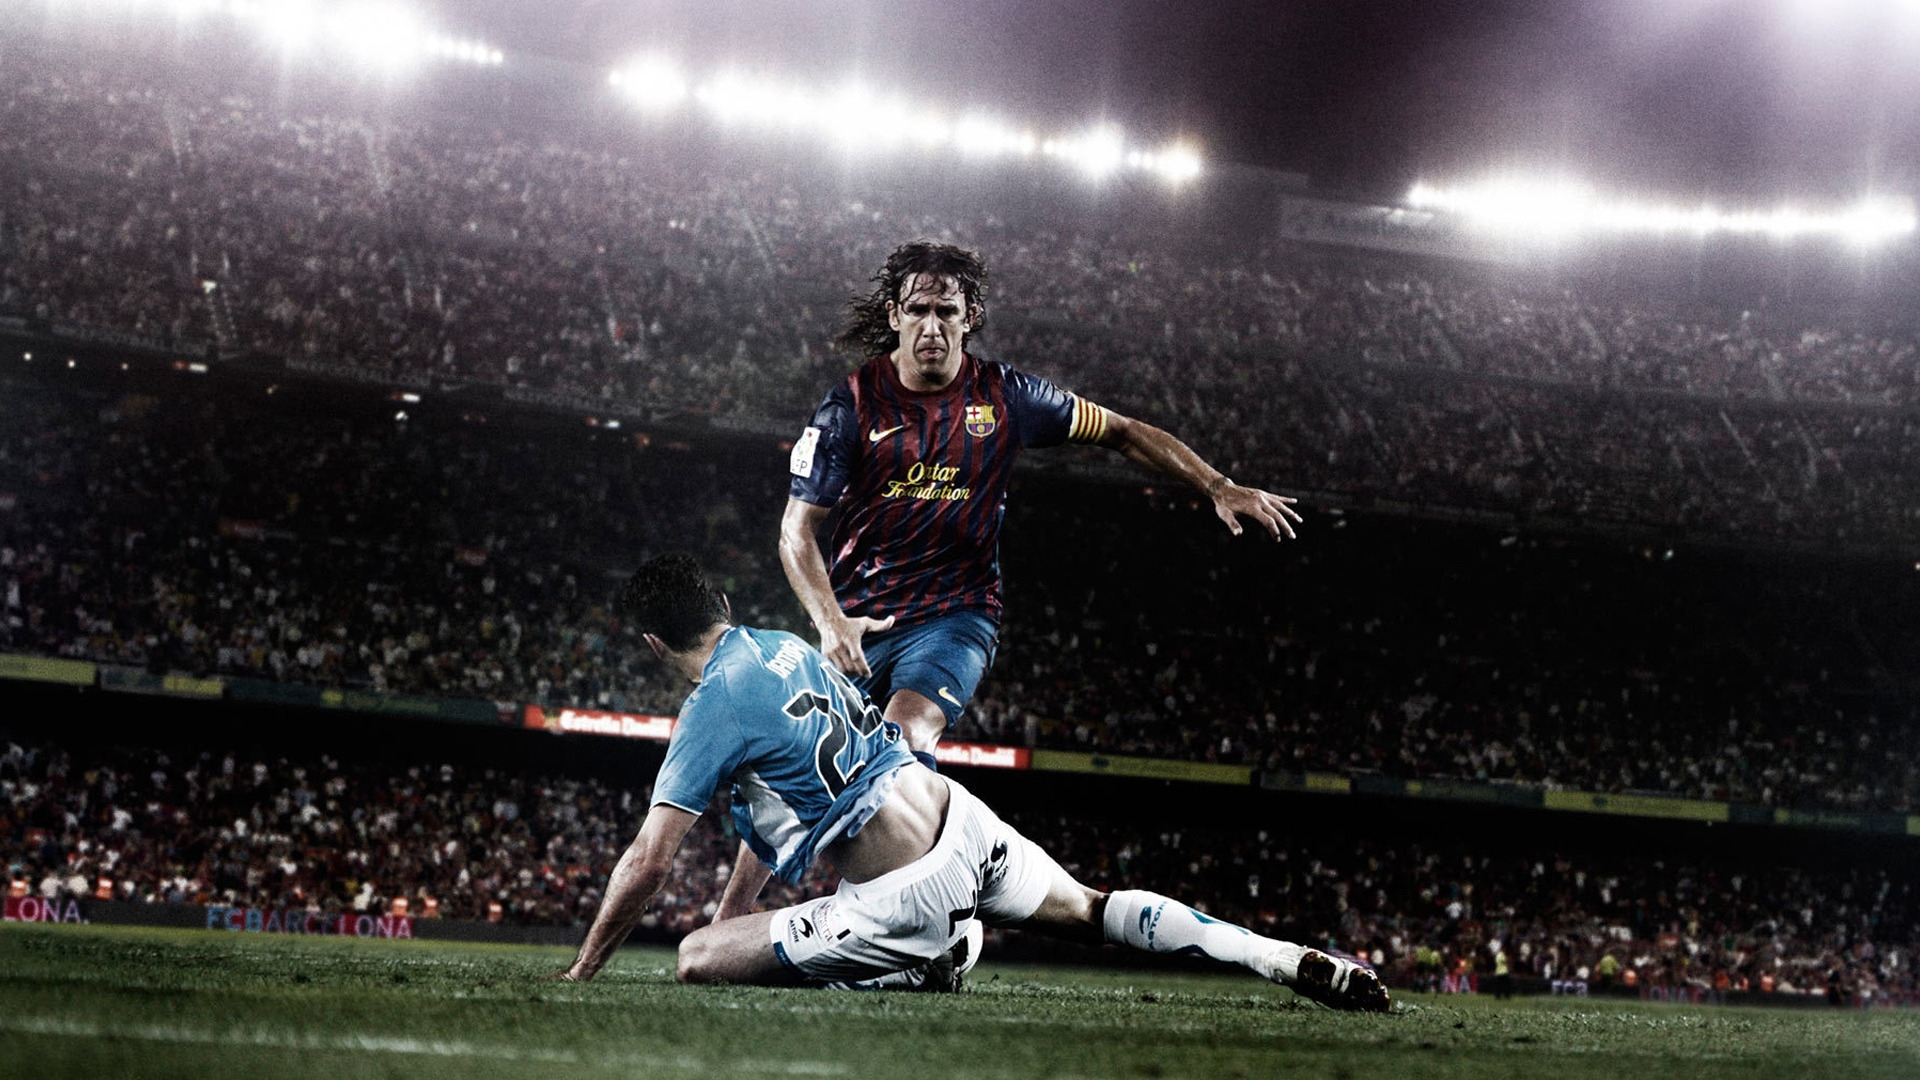 Carled Puyol for 1920 x 1080 HDTV 1080p resolution